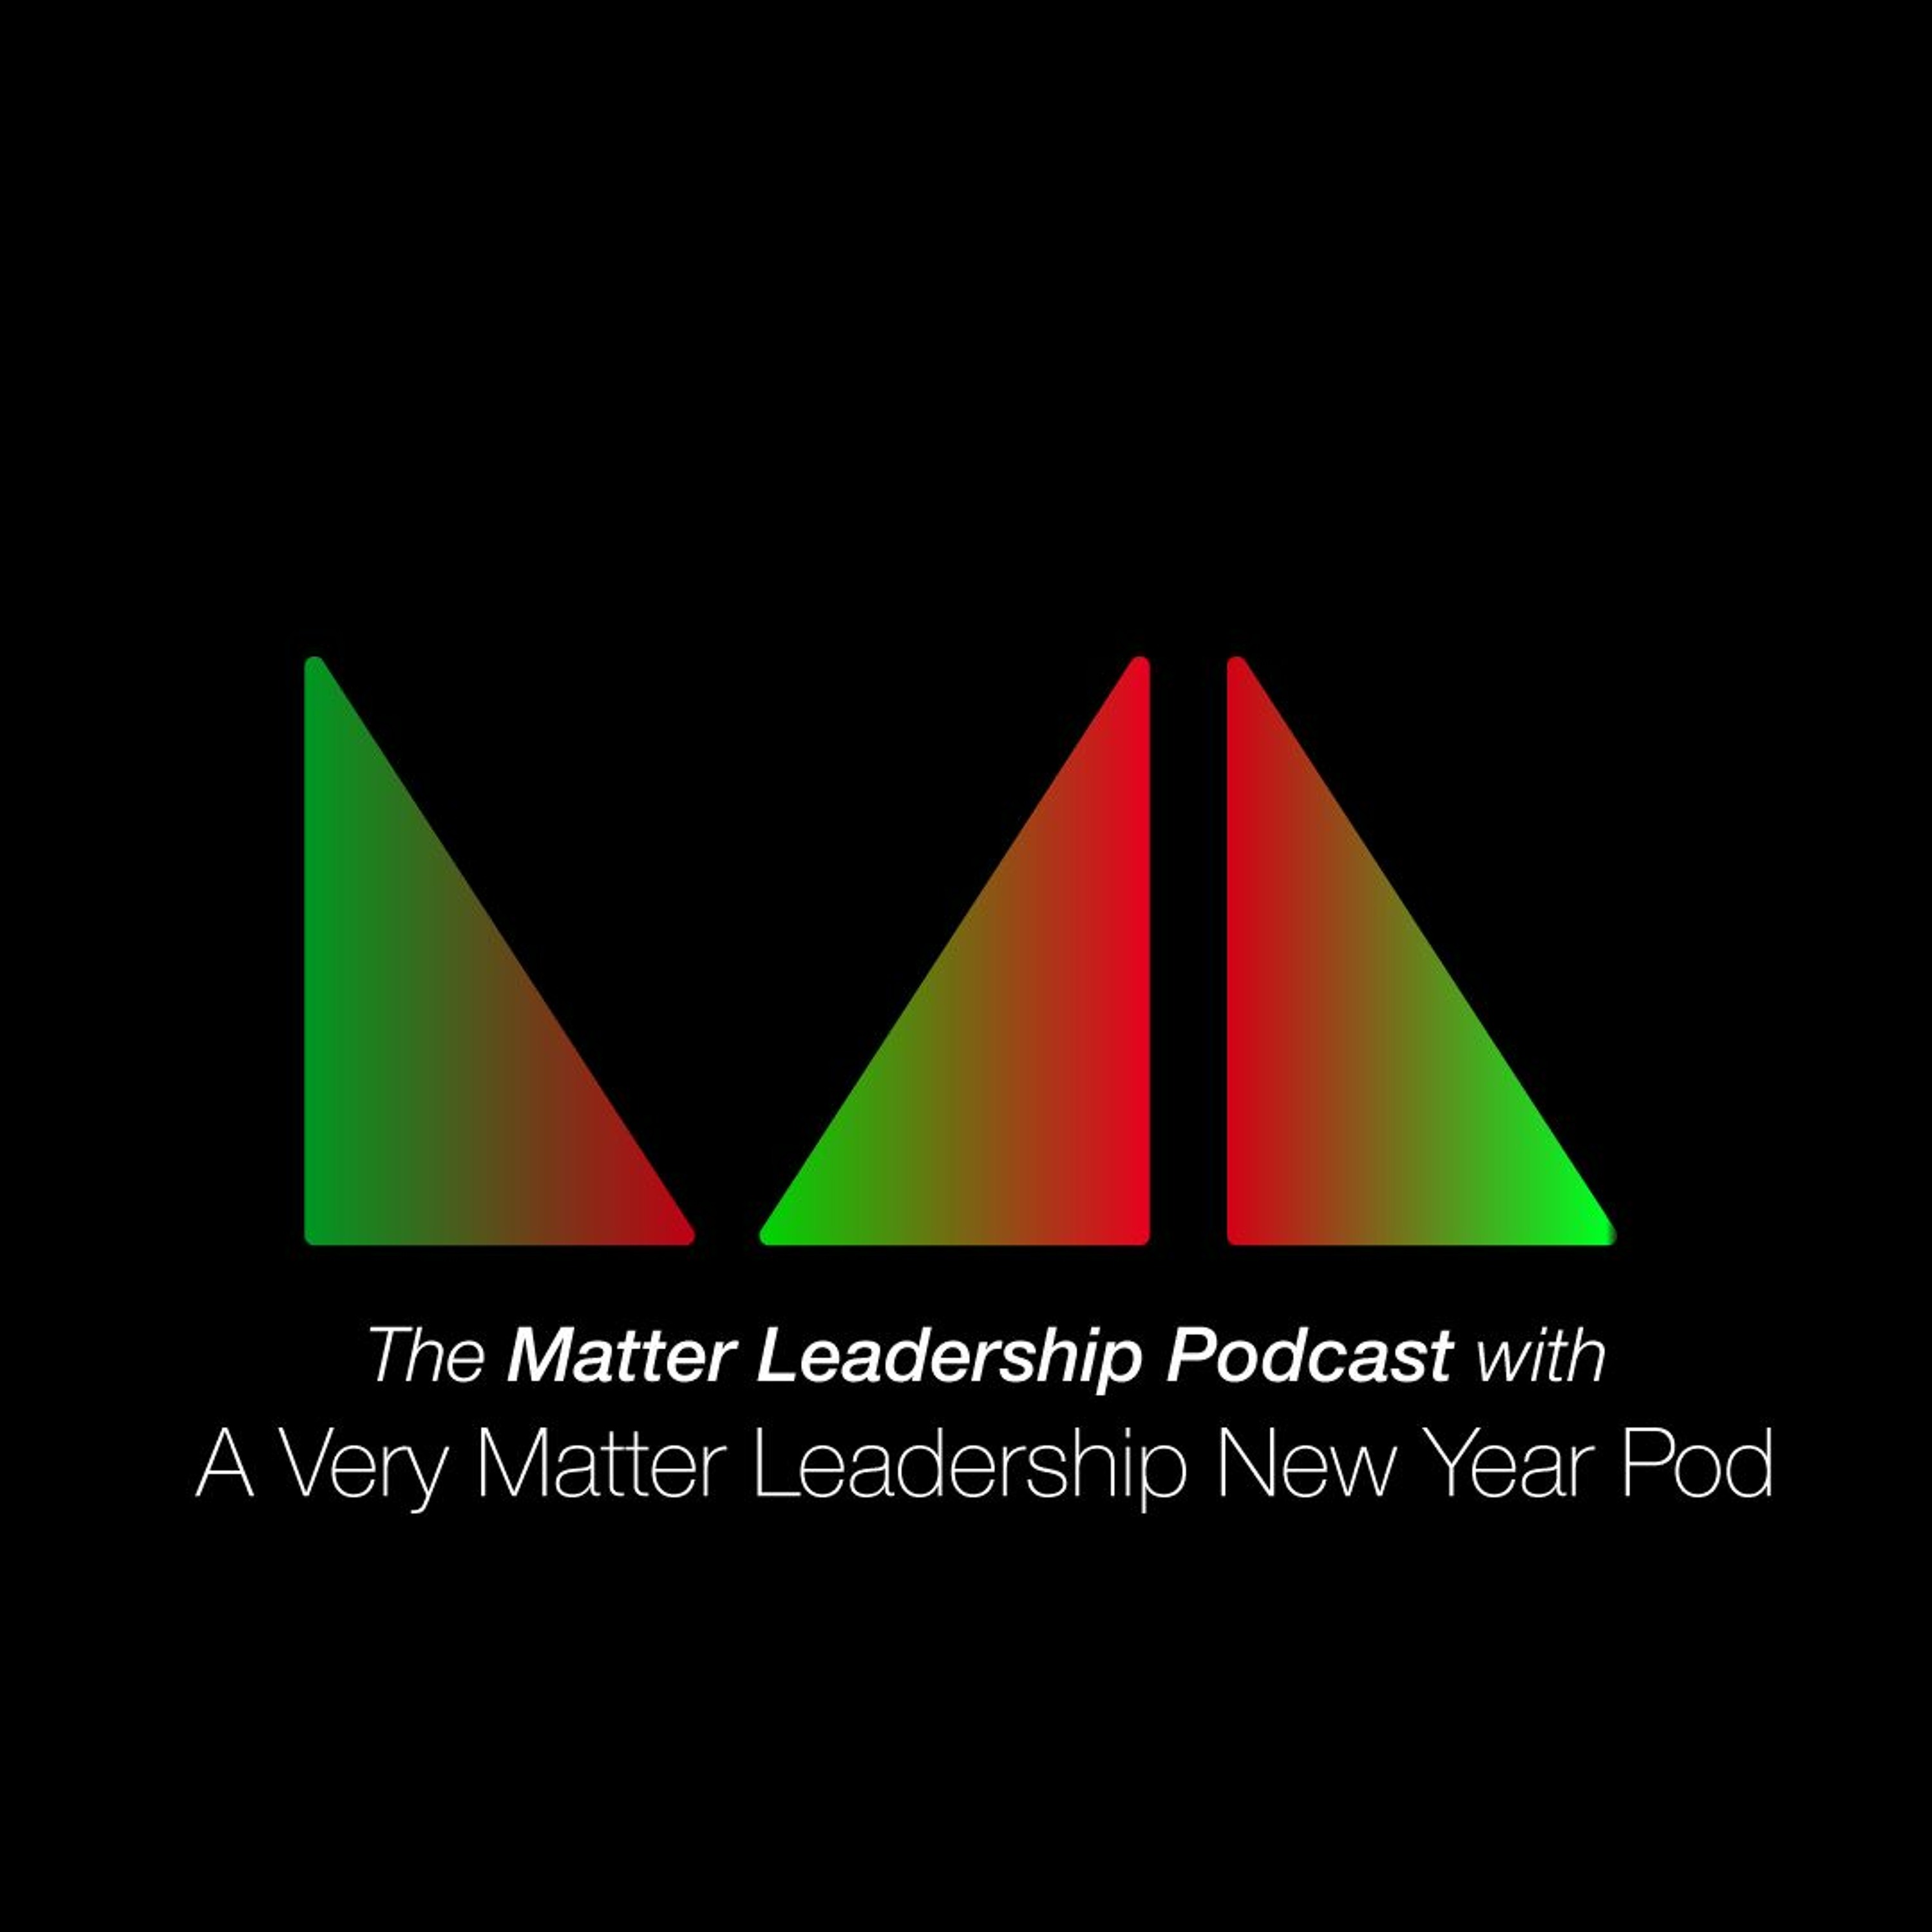 The Matter Leadership Podcast: A Very Matter Leadership New Year Pod